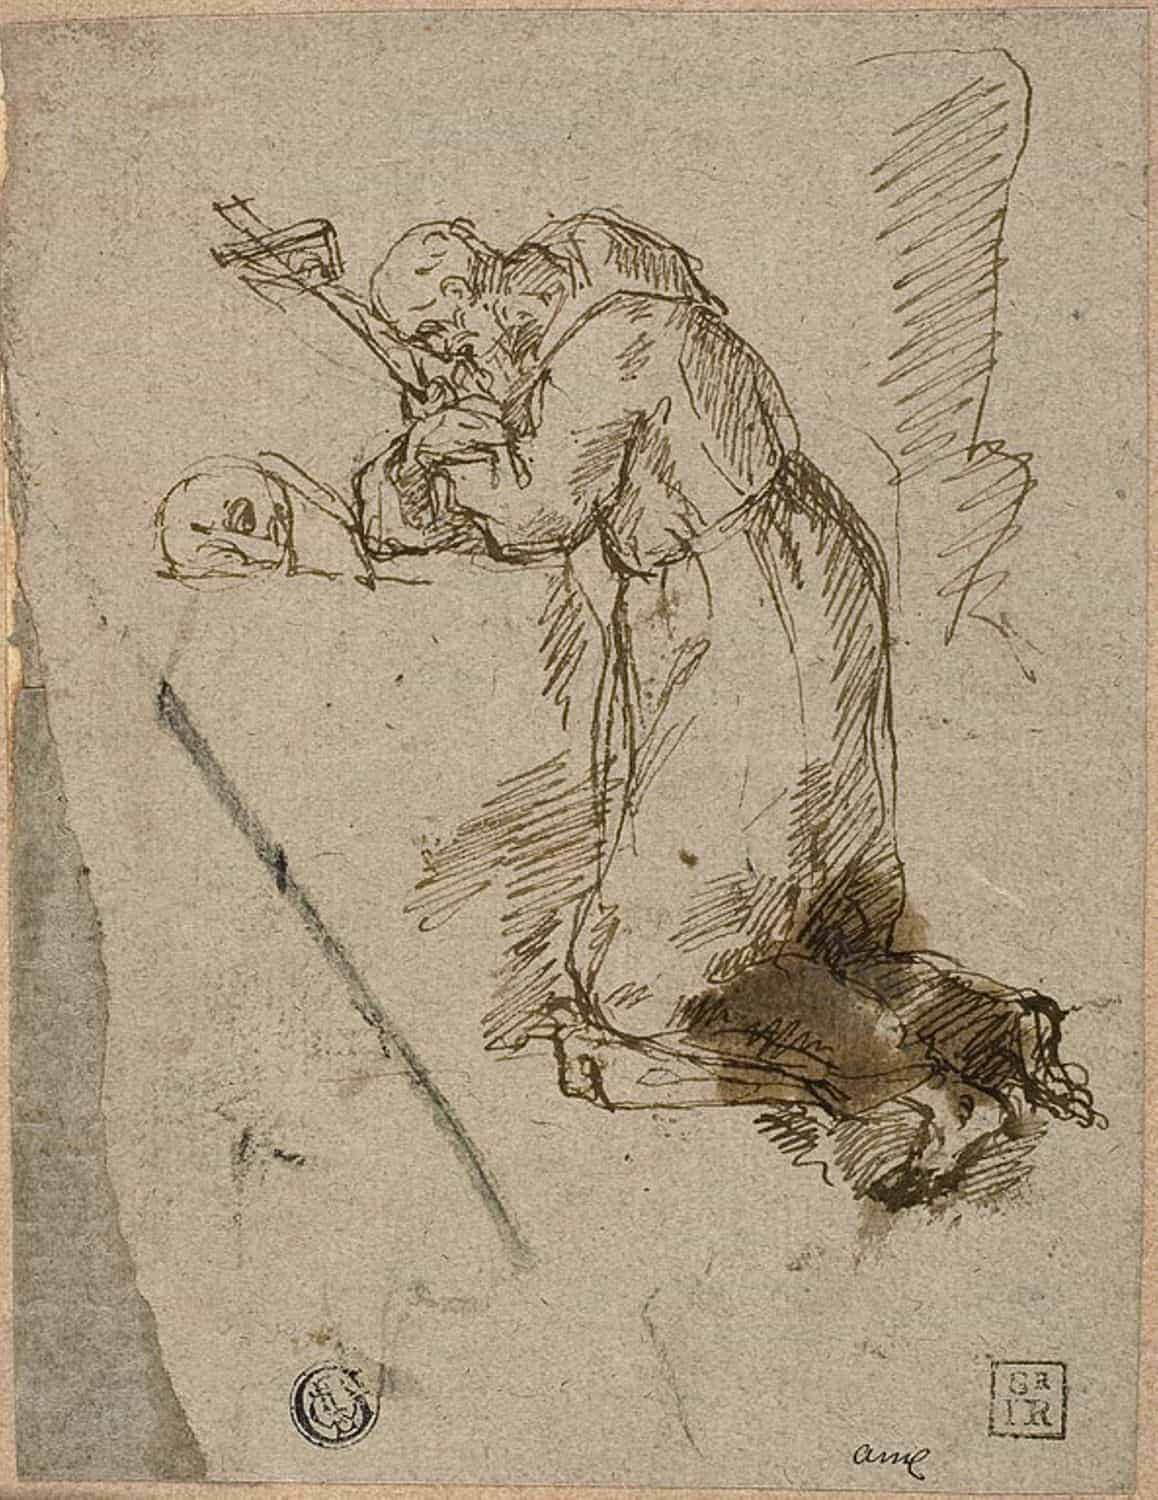 Unknown Artist, St. Francis of Assisi in Prayer, 17th century, The Art Institute of Chicago (article on prayer)